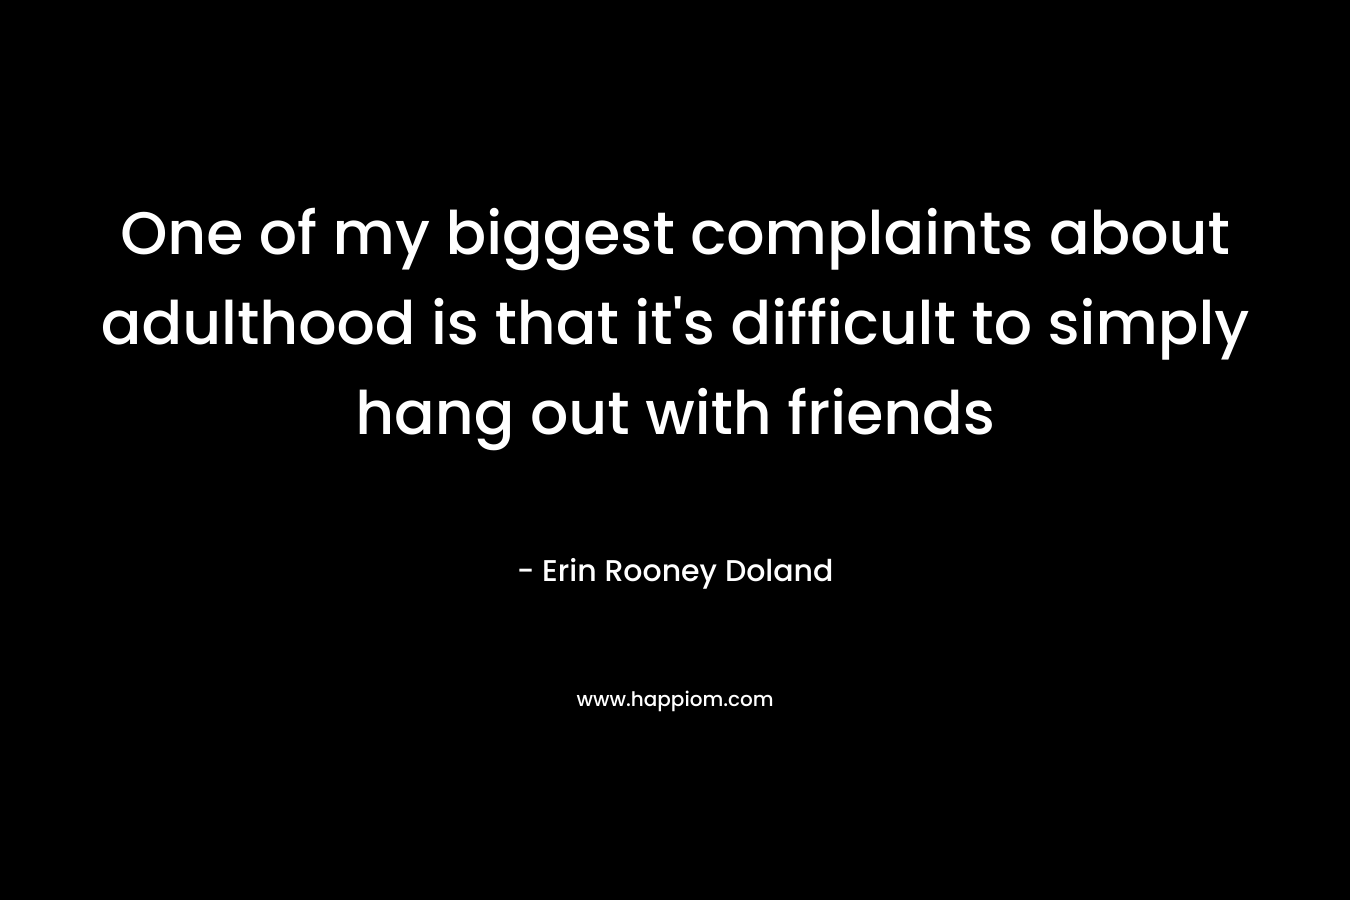 One of my biggest complaints about adulthood is that it’s difficult to simply hang out with friends – Erin Rooney Doland